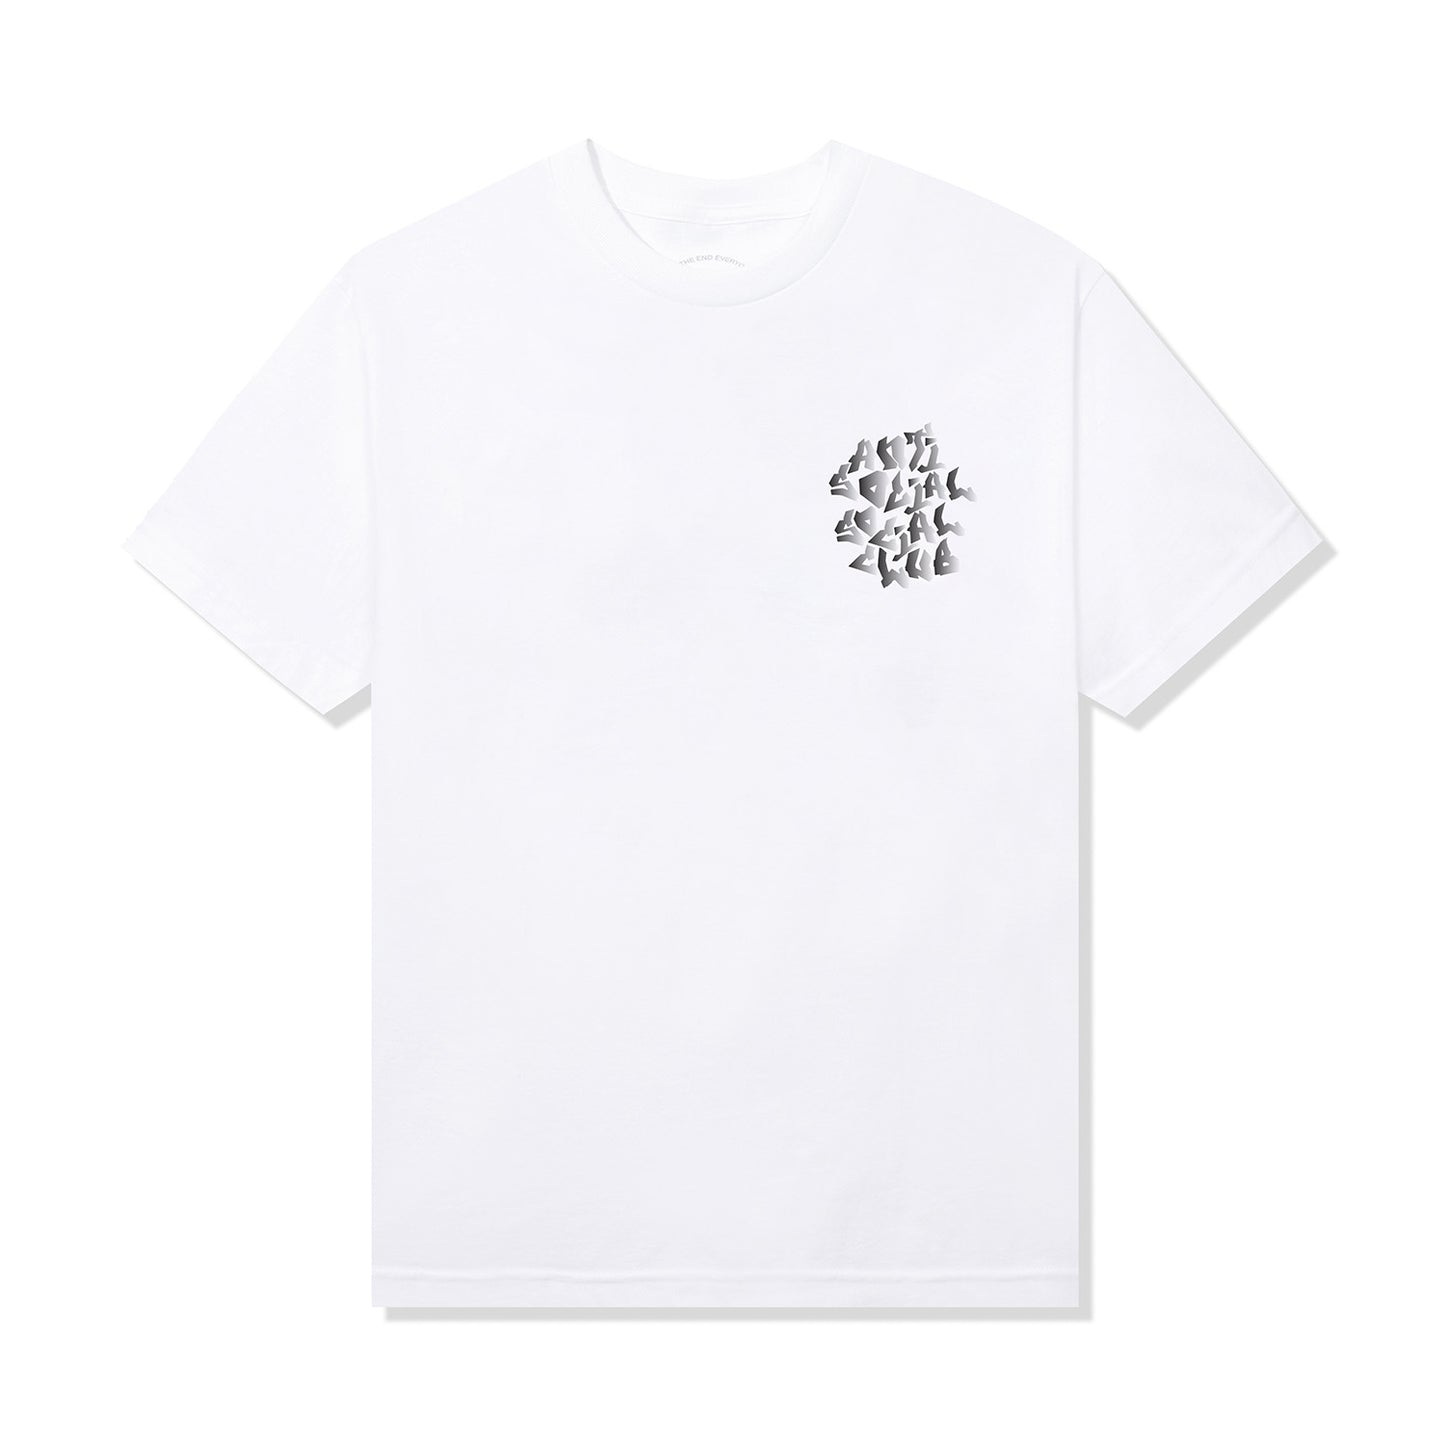 assc-cry-out-loud-white-front